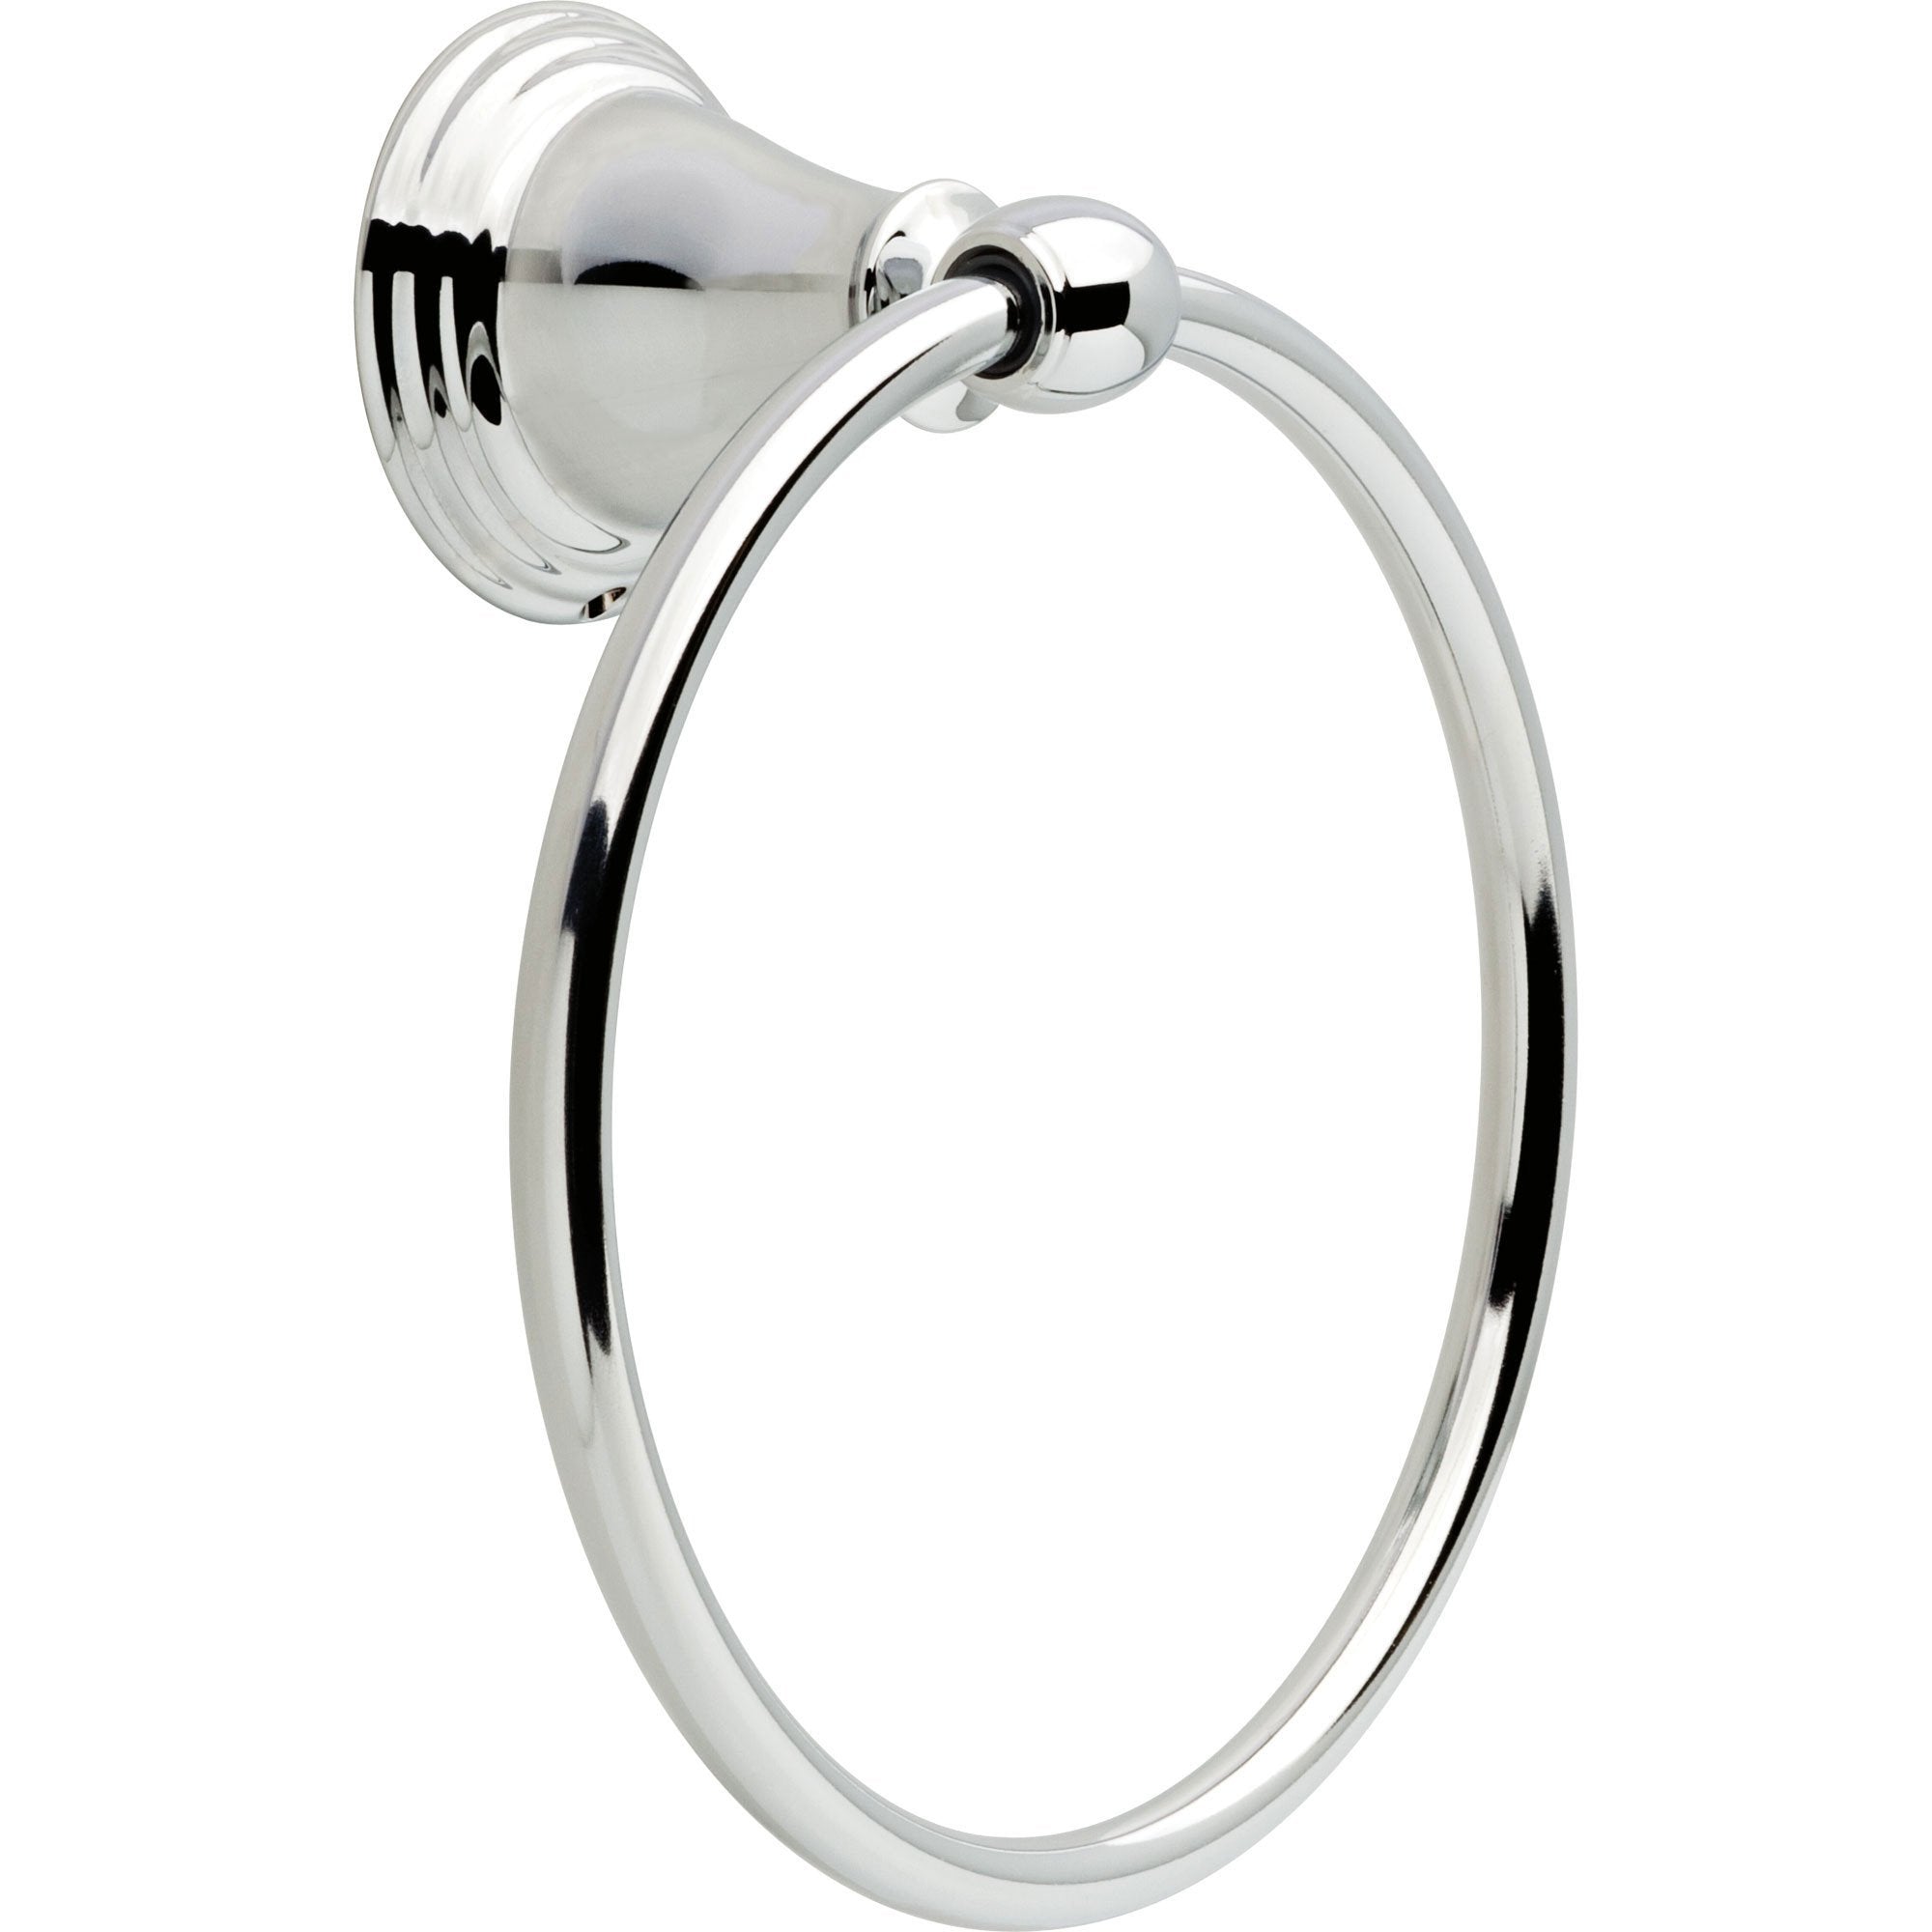 Delta Windemere Bathroom Accessory Chrome Hand Towel Ring 638707